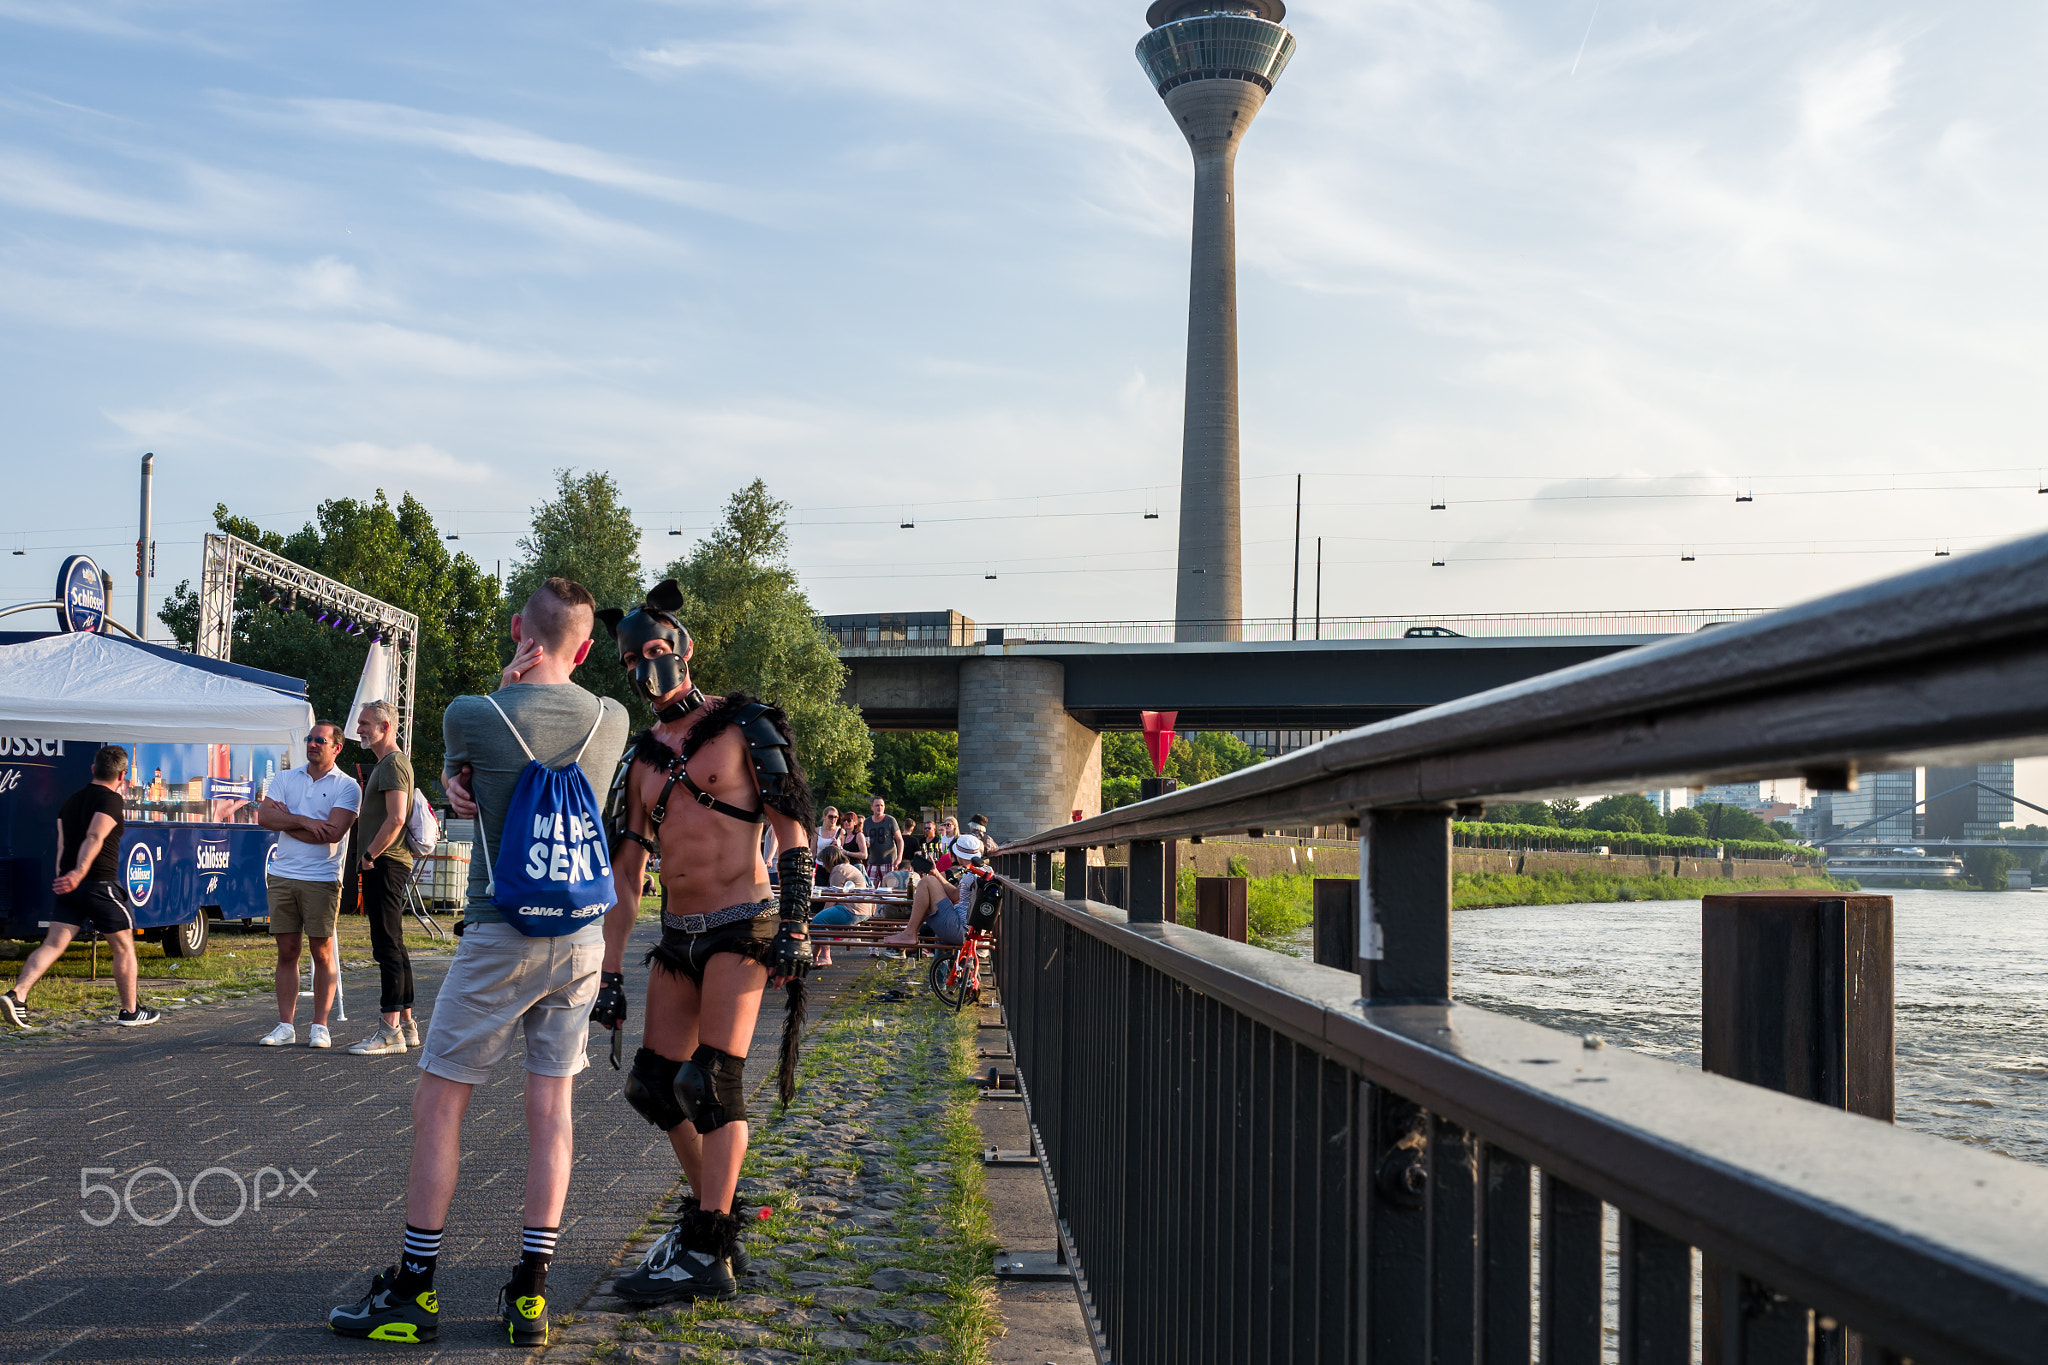 Duesseldorf, Germany - June 04, 2018: Men celebrating at the Gay Pride party at the Rhine river.